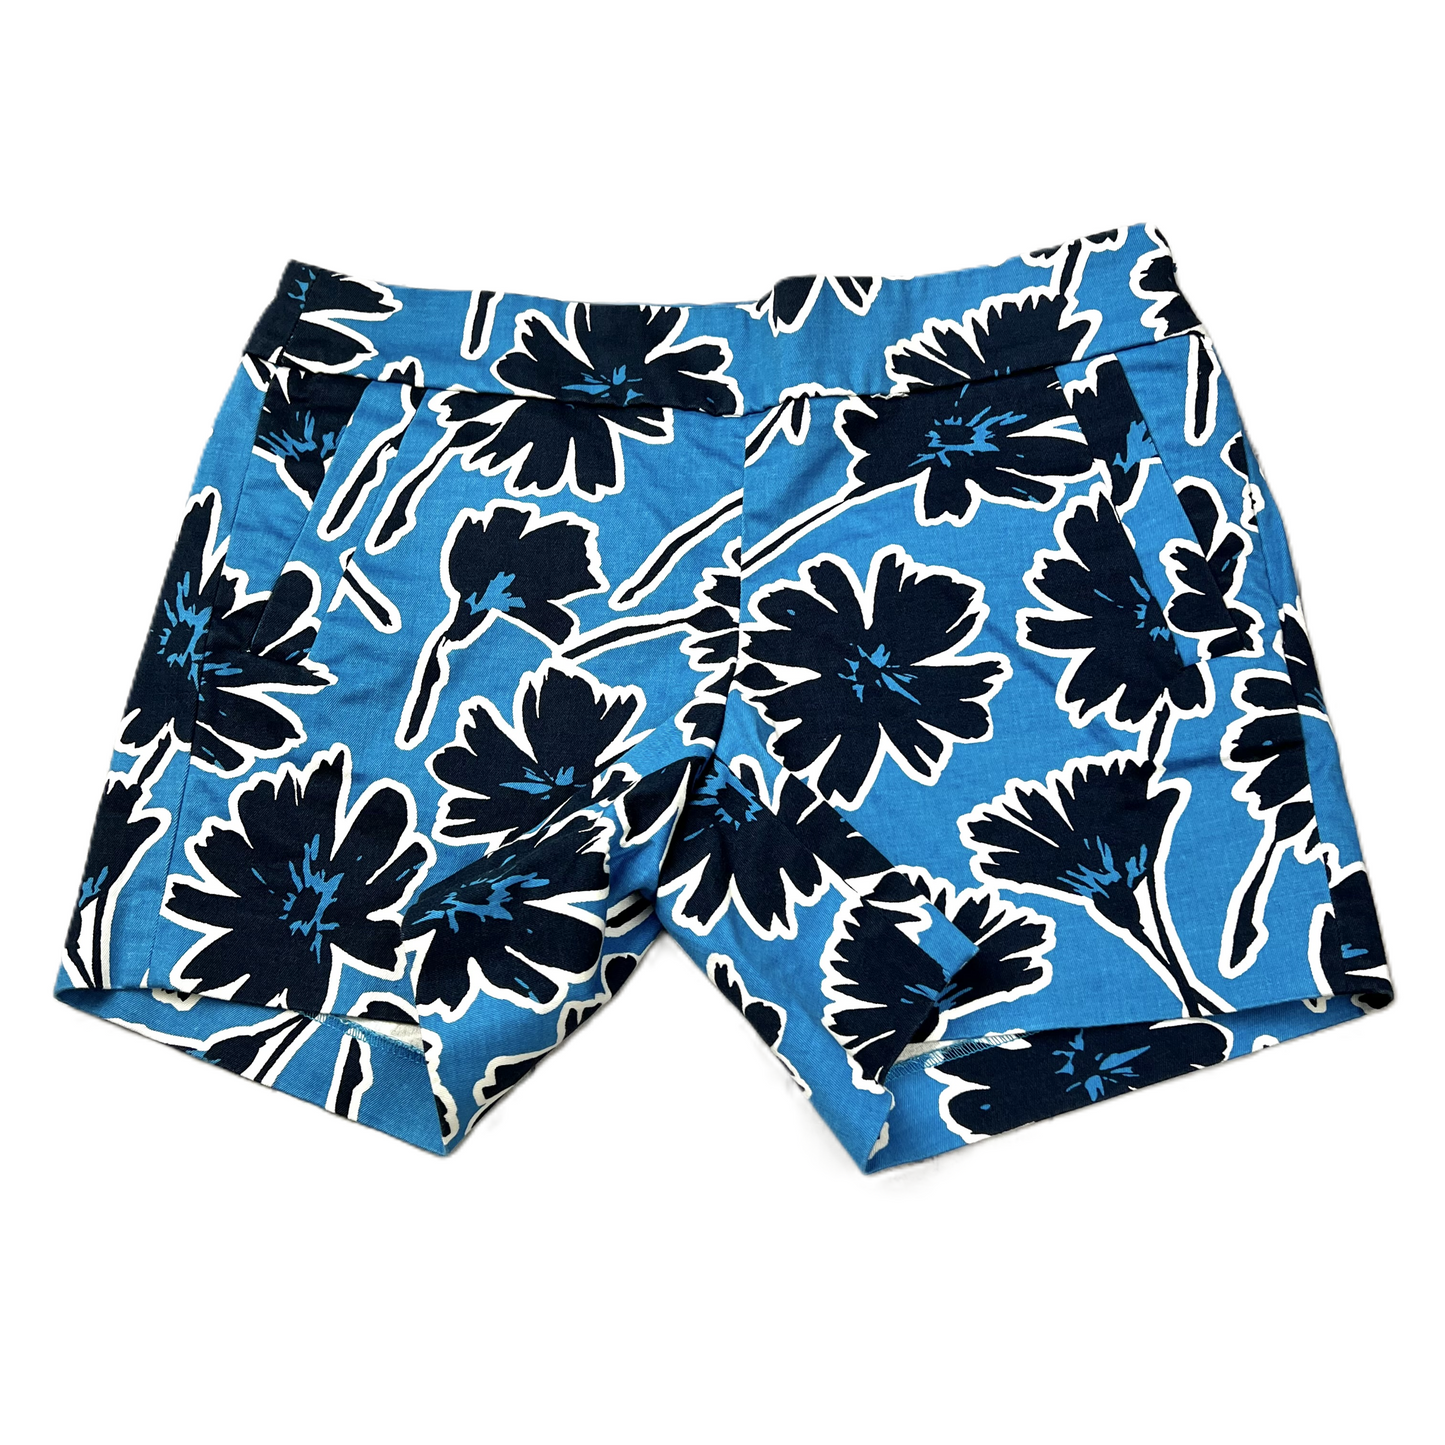 Blue Shorts By J. Crew, Size: 4